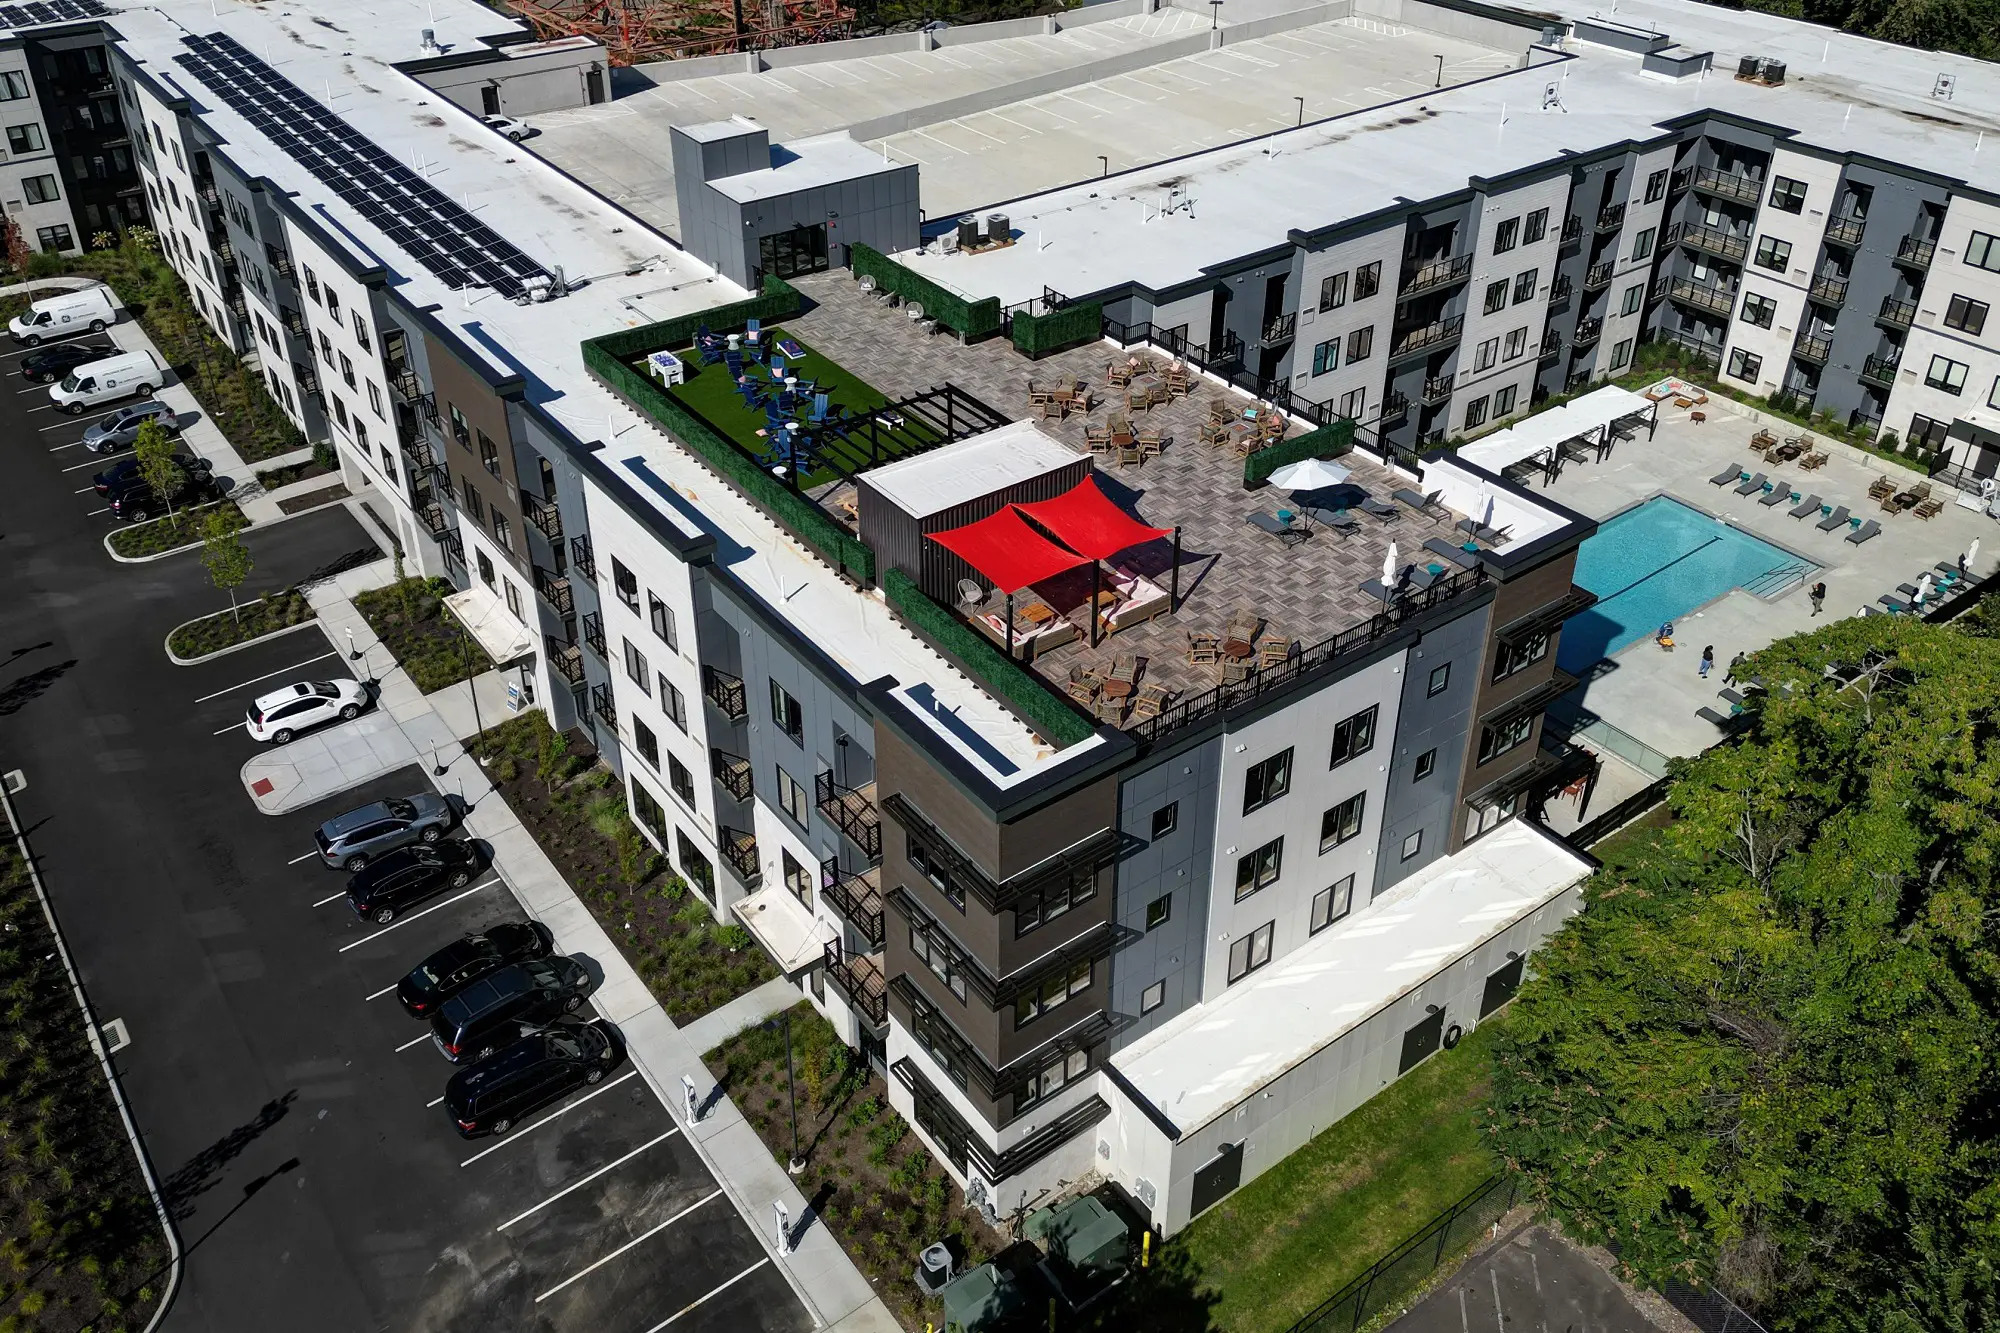 The Beacon aerial drone shot of the building corner showing the rooftop amenity deck, the top floor of the parking garage, and the ground floor swimming pool courtyard